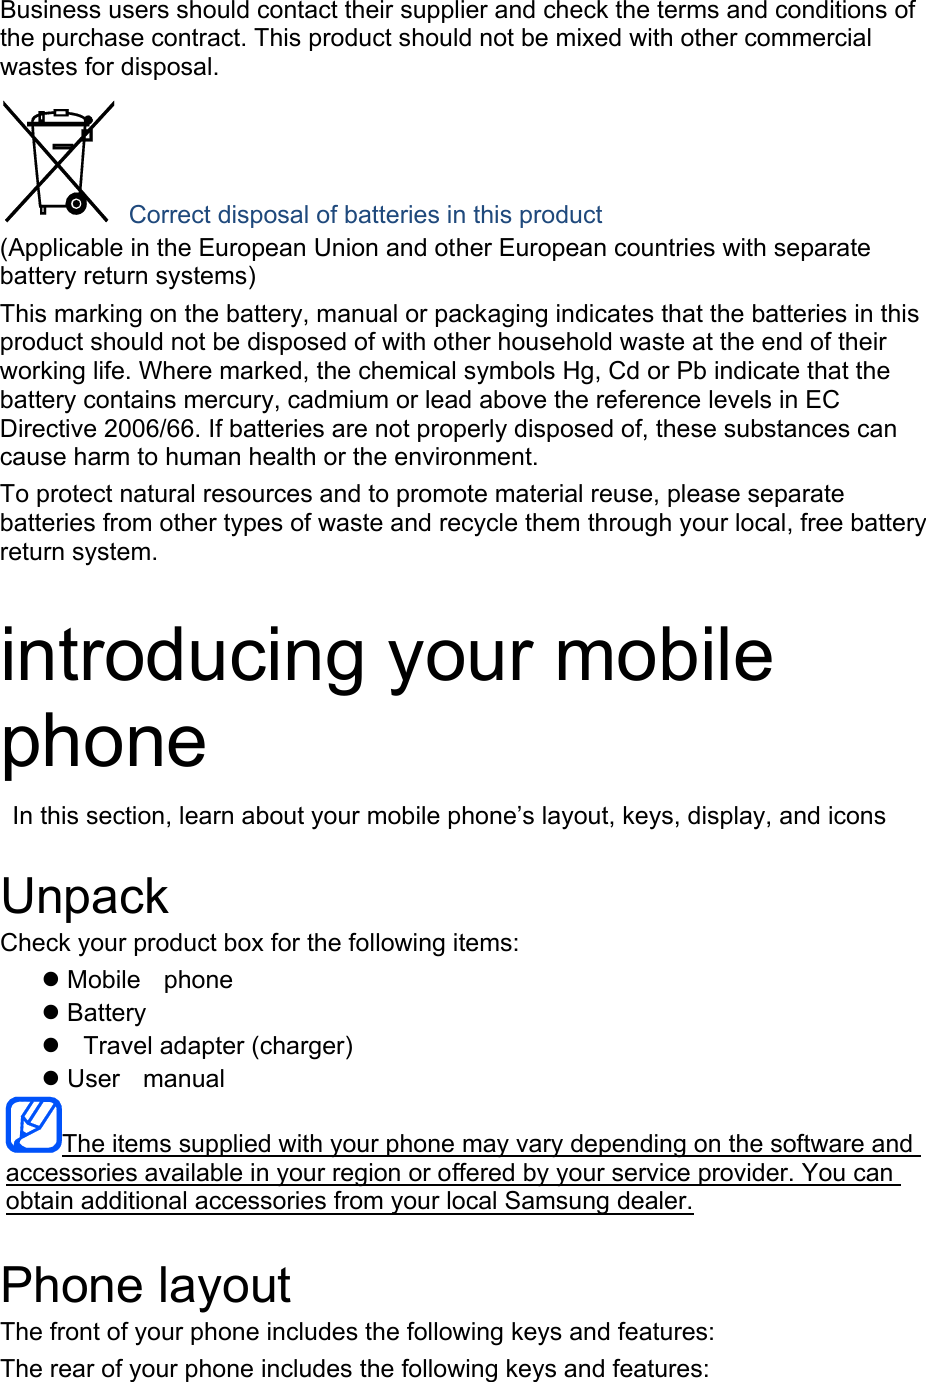 Business users should contact their supplier and check the terms and conditions of the purchase contract. This product should not be mixed with other commercial wastes for disposal.  Correct disposal of batteries in this product (Applicable in the European Union and other European countries with separate battery return systems) This marking on the battery, manual or packaging indicates that the batteries in this product should not be disposed of with other household waste at the end of their working life. Where marked, the chemical symbols Hg, Cd or Pb indicate that the battery contains mercury, cadmium or lead above the reference levels in EC Directive 2006/66. If batteries are not properly disposed of, these substances can cause harm to human health or the environment. To protect natural resources and to promote material reuse, please separate batteries from other types of waste and recycle them through your local, free battery return system.  introducing your mobile phone   In this section, learn about your mobile phone’s layout, keys, display, and icons  Unpack Check your product box for the following items: z Mobile phone z Battery z  Travel adapter (charger) z User manual The items supplied with your phone may vary depending on the software and accessories available in your region or offered by your service provider. You can obtain additional accessories from your local Samsung dealer.  Phone layout The front of your phone includes the following keys and features: The rear of your phone includes the following keys and features: 